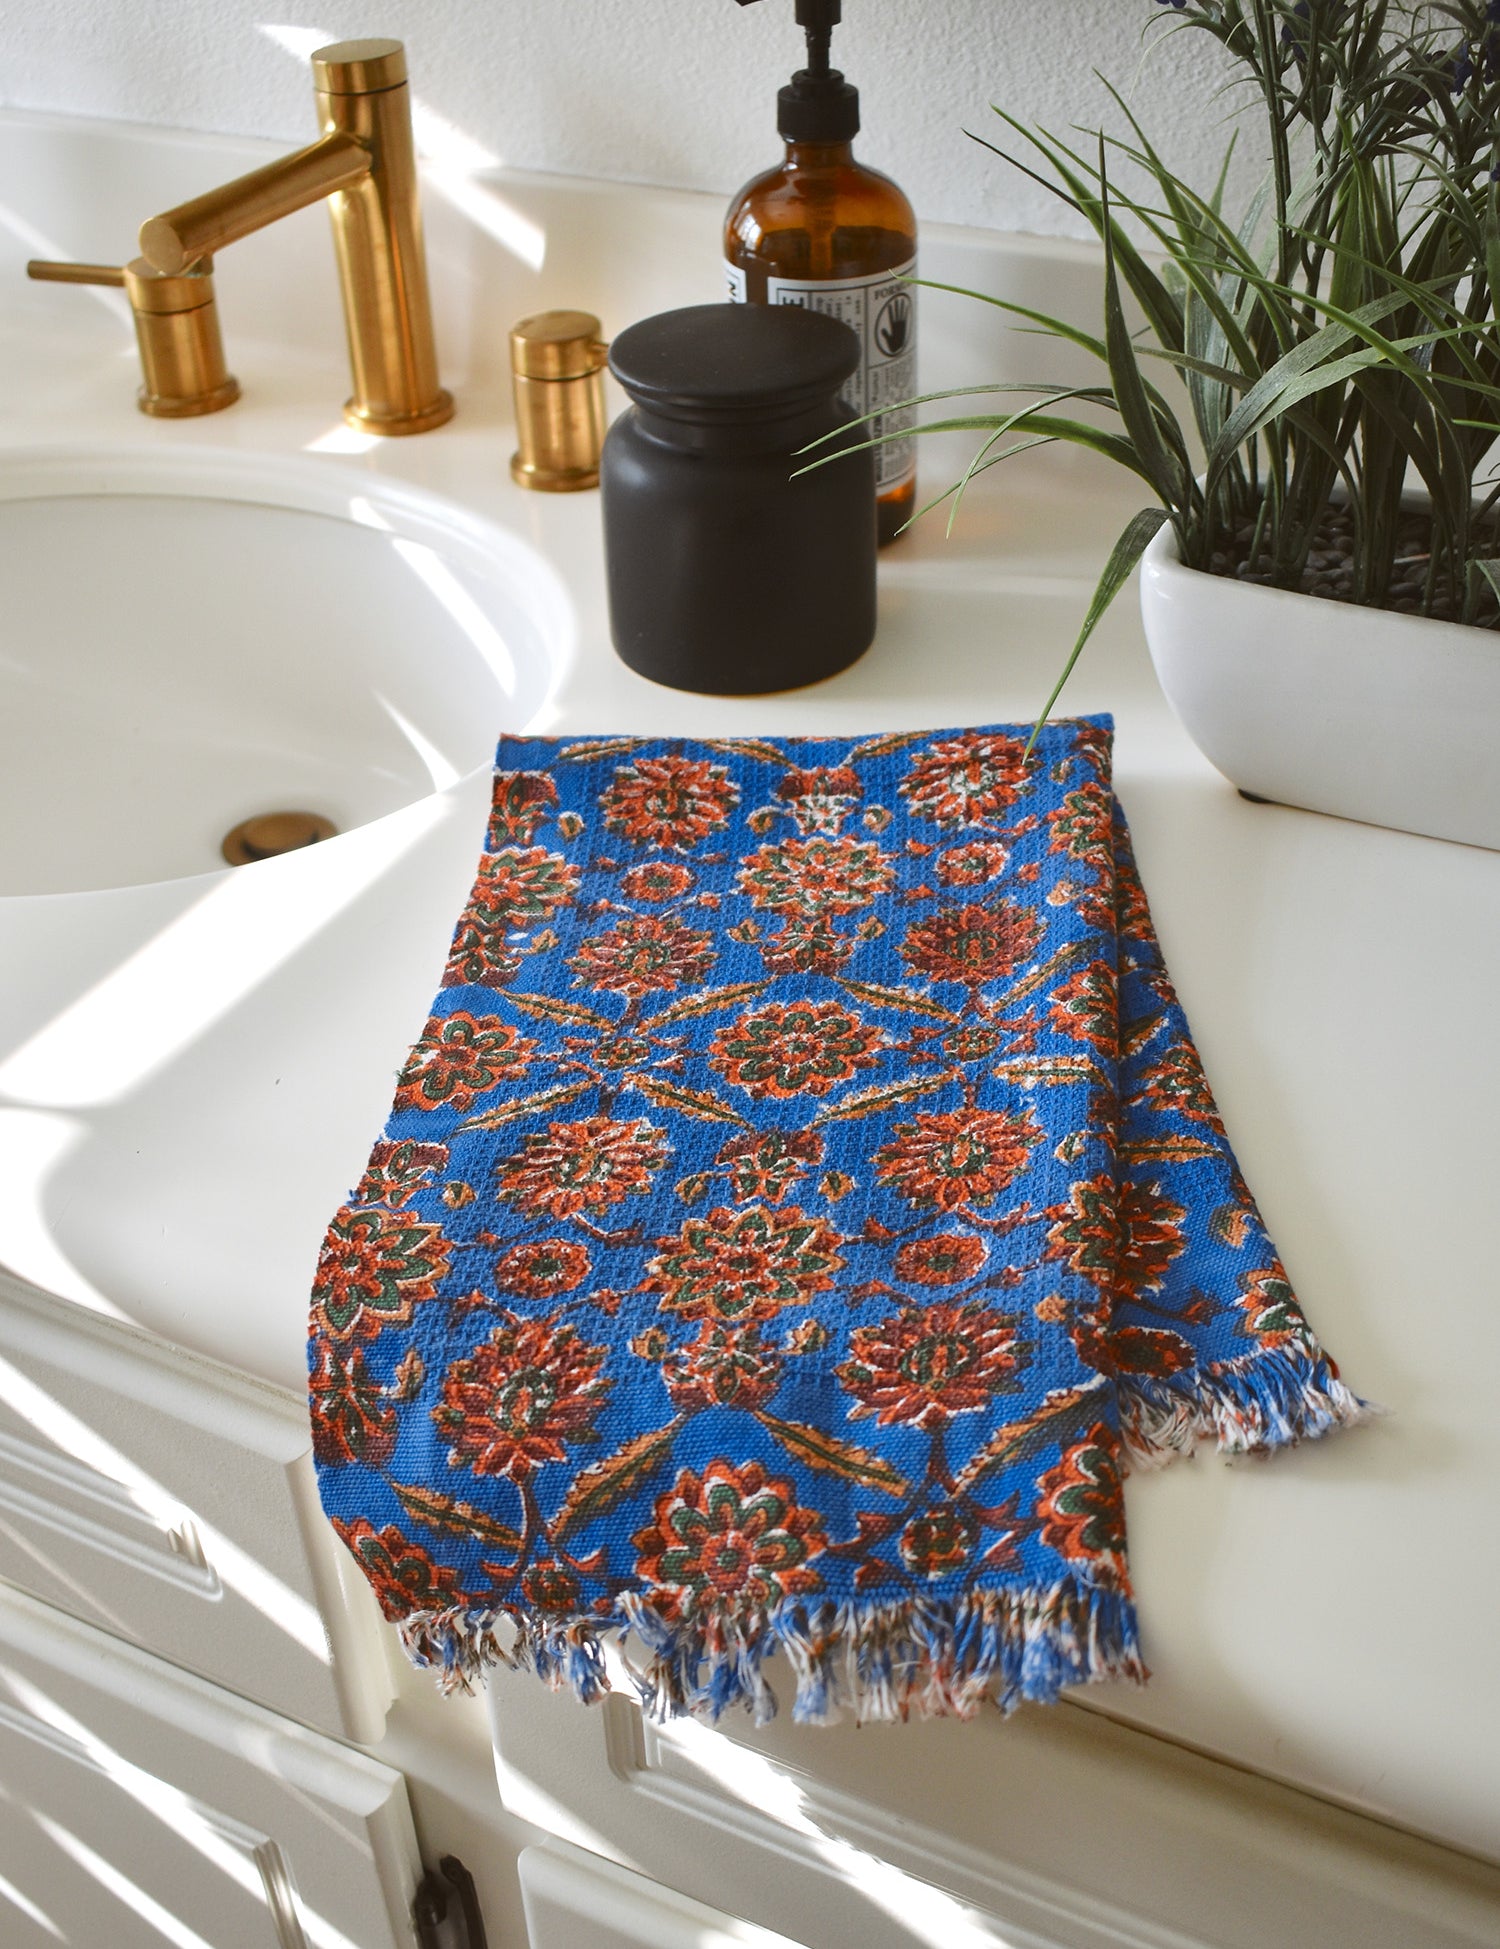 One Adria block printed hand towel folded and placed on a white bathroom counter